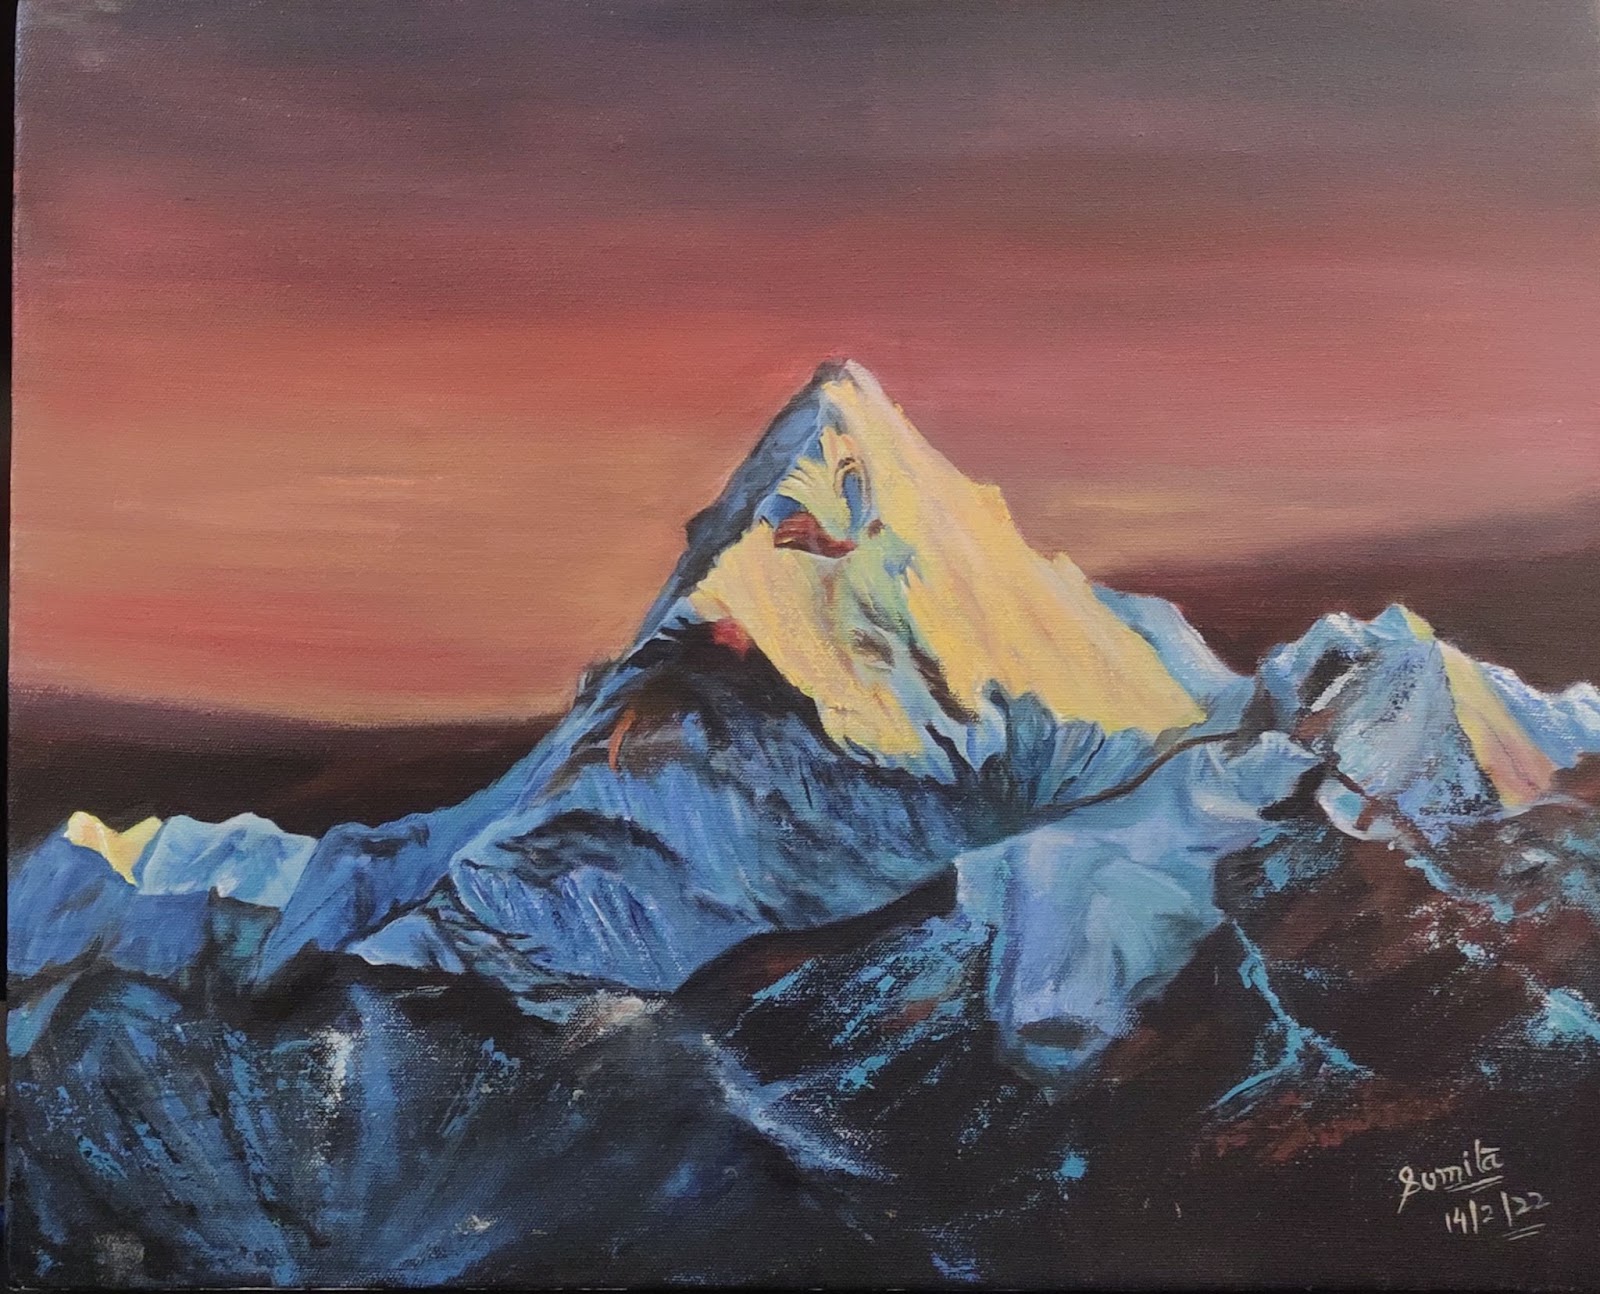 This is a landscape painting reflecting the beautiful shades of the mountain.